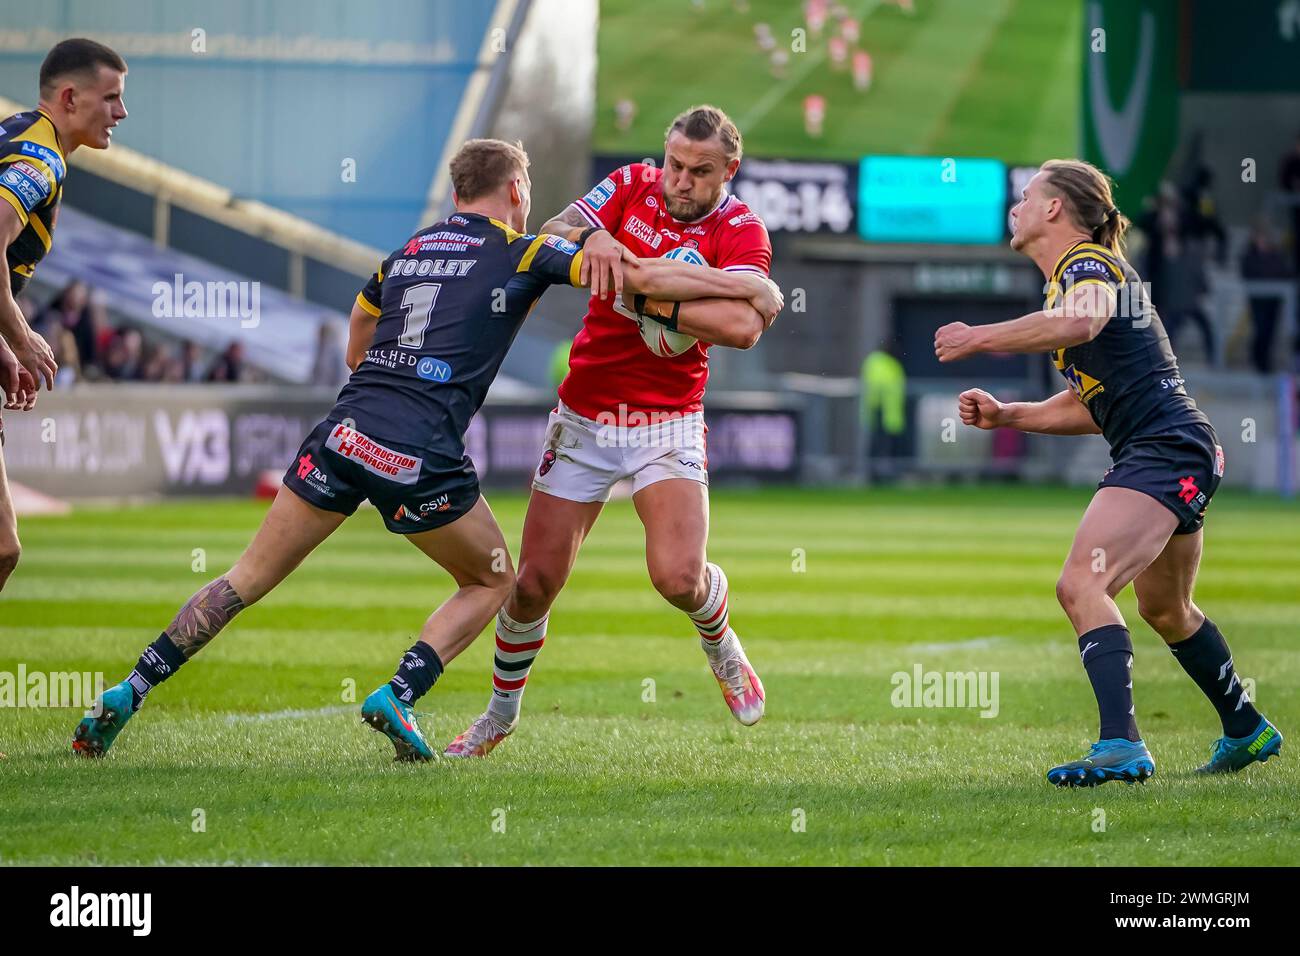 CHRIS HANKINSON getting away from the tackler. Salford Red Devils Vs Castleford Tigers Betfred Super League Round 2, Salford Community Stadium, 25th February 2024. Credit: James Giblin/Alamy Live News. Stock Photo